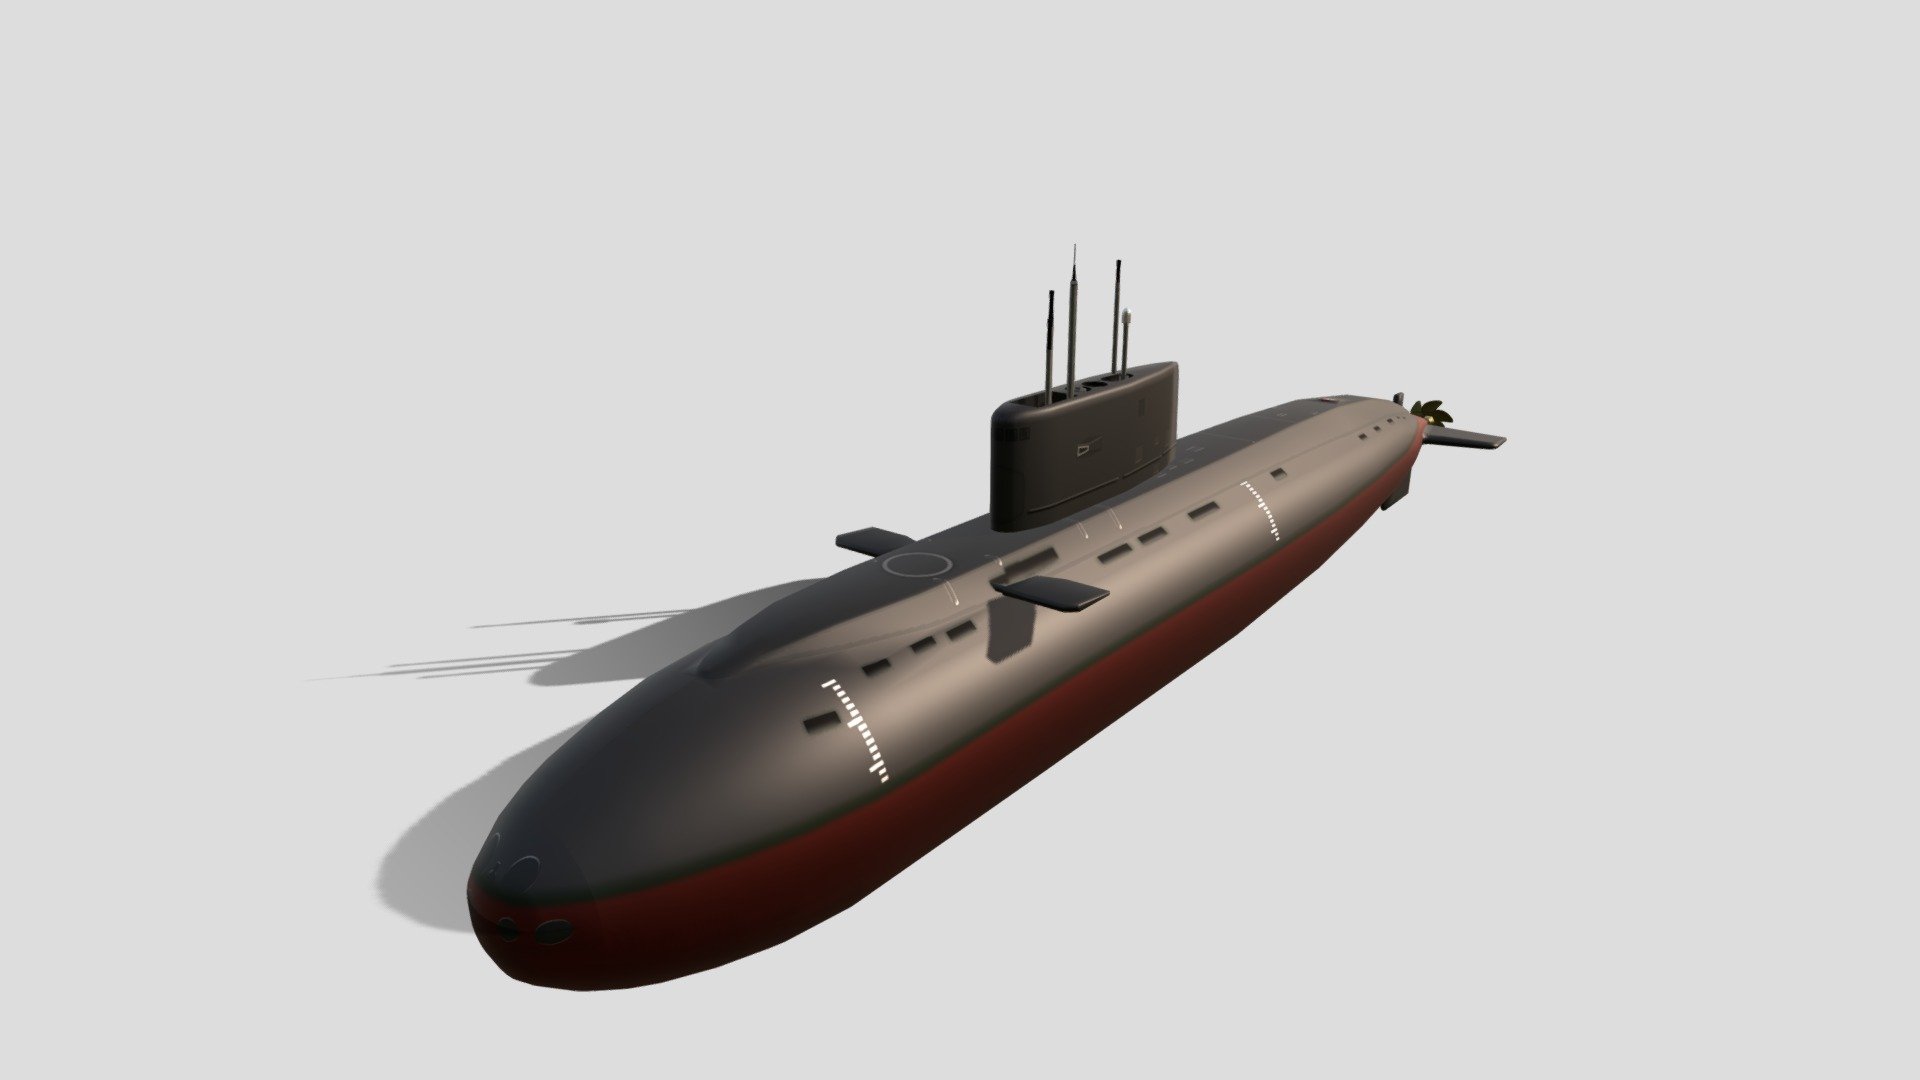 ASG-ISR

Submarine Kilo class Diesel Electric Attack Submarine

Synthetic Environment Entity for use in Simulation and Training for Intelligence, Surveillance and Reconnaissance (ISR).


Low poly model 
Accuratly modelled off plan and using photo reference
1 LOD
1 UV texture map 2048
no animation
no materials
no maps other that albedo
4225 triangles

http://www.asg-isr.com - Submarine Kilo class Diesel Electric  low poly - 3D model by ASG-ISR 3d model